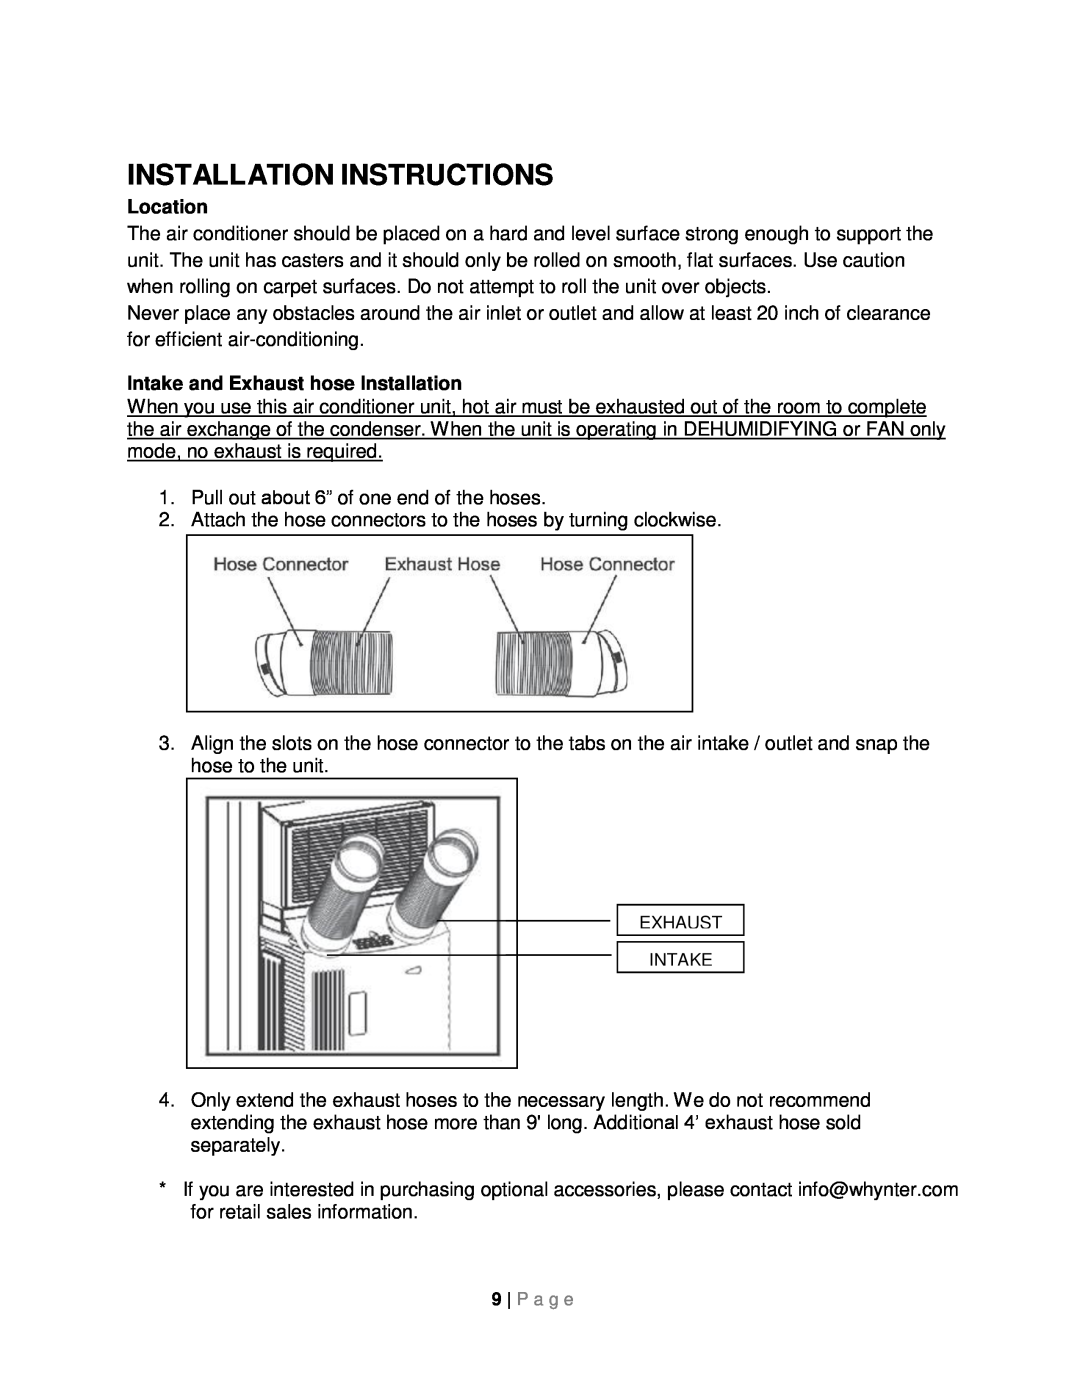 Whynter ARC-14SH instruction manual Installation Instructions, Location, Intake and Exhaust hose Installation 